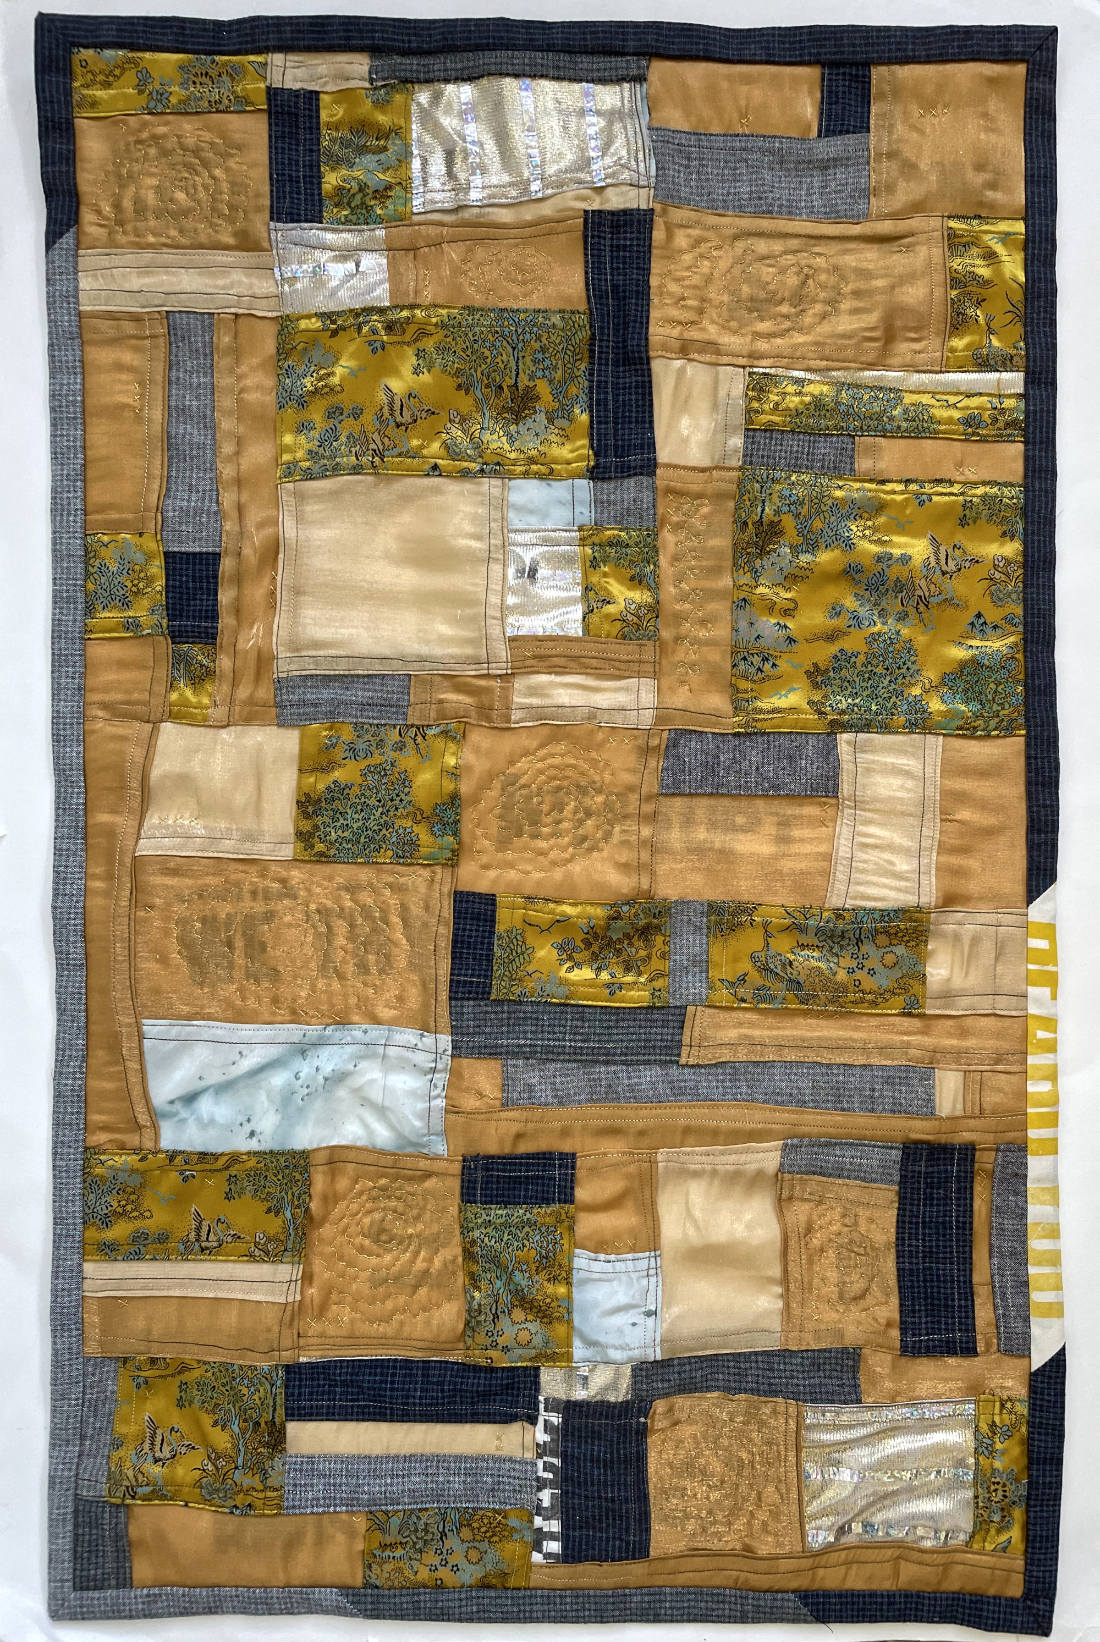 shimmery gold quilt made up of pieced rectangles with some quilted flowers